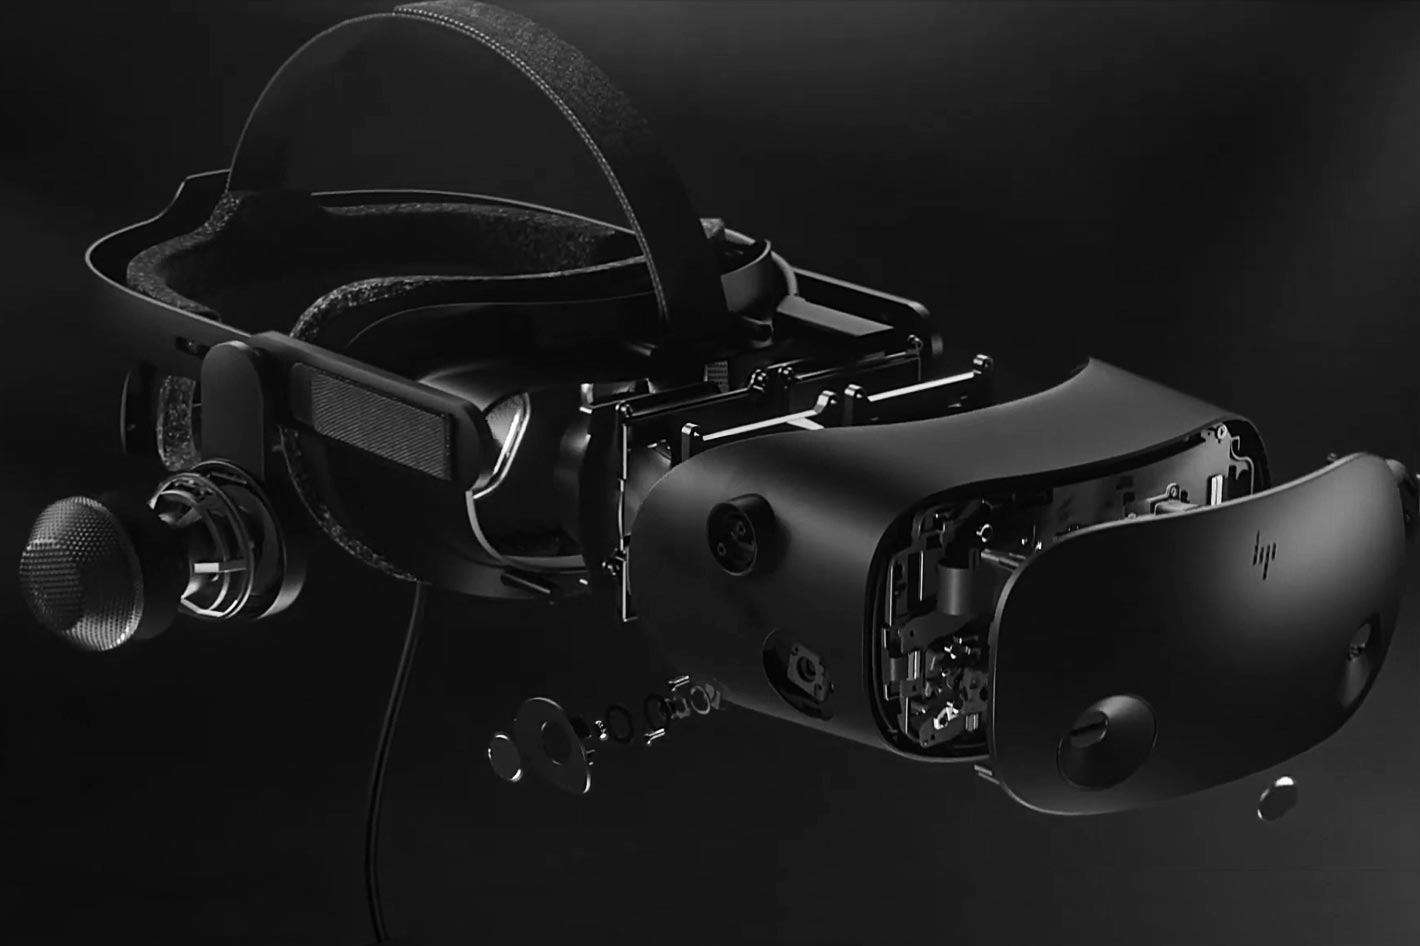 2021 Newest HP Reverb G2 Virtual Reality Headset